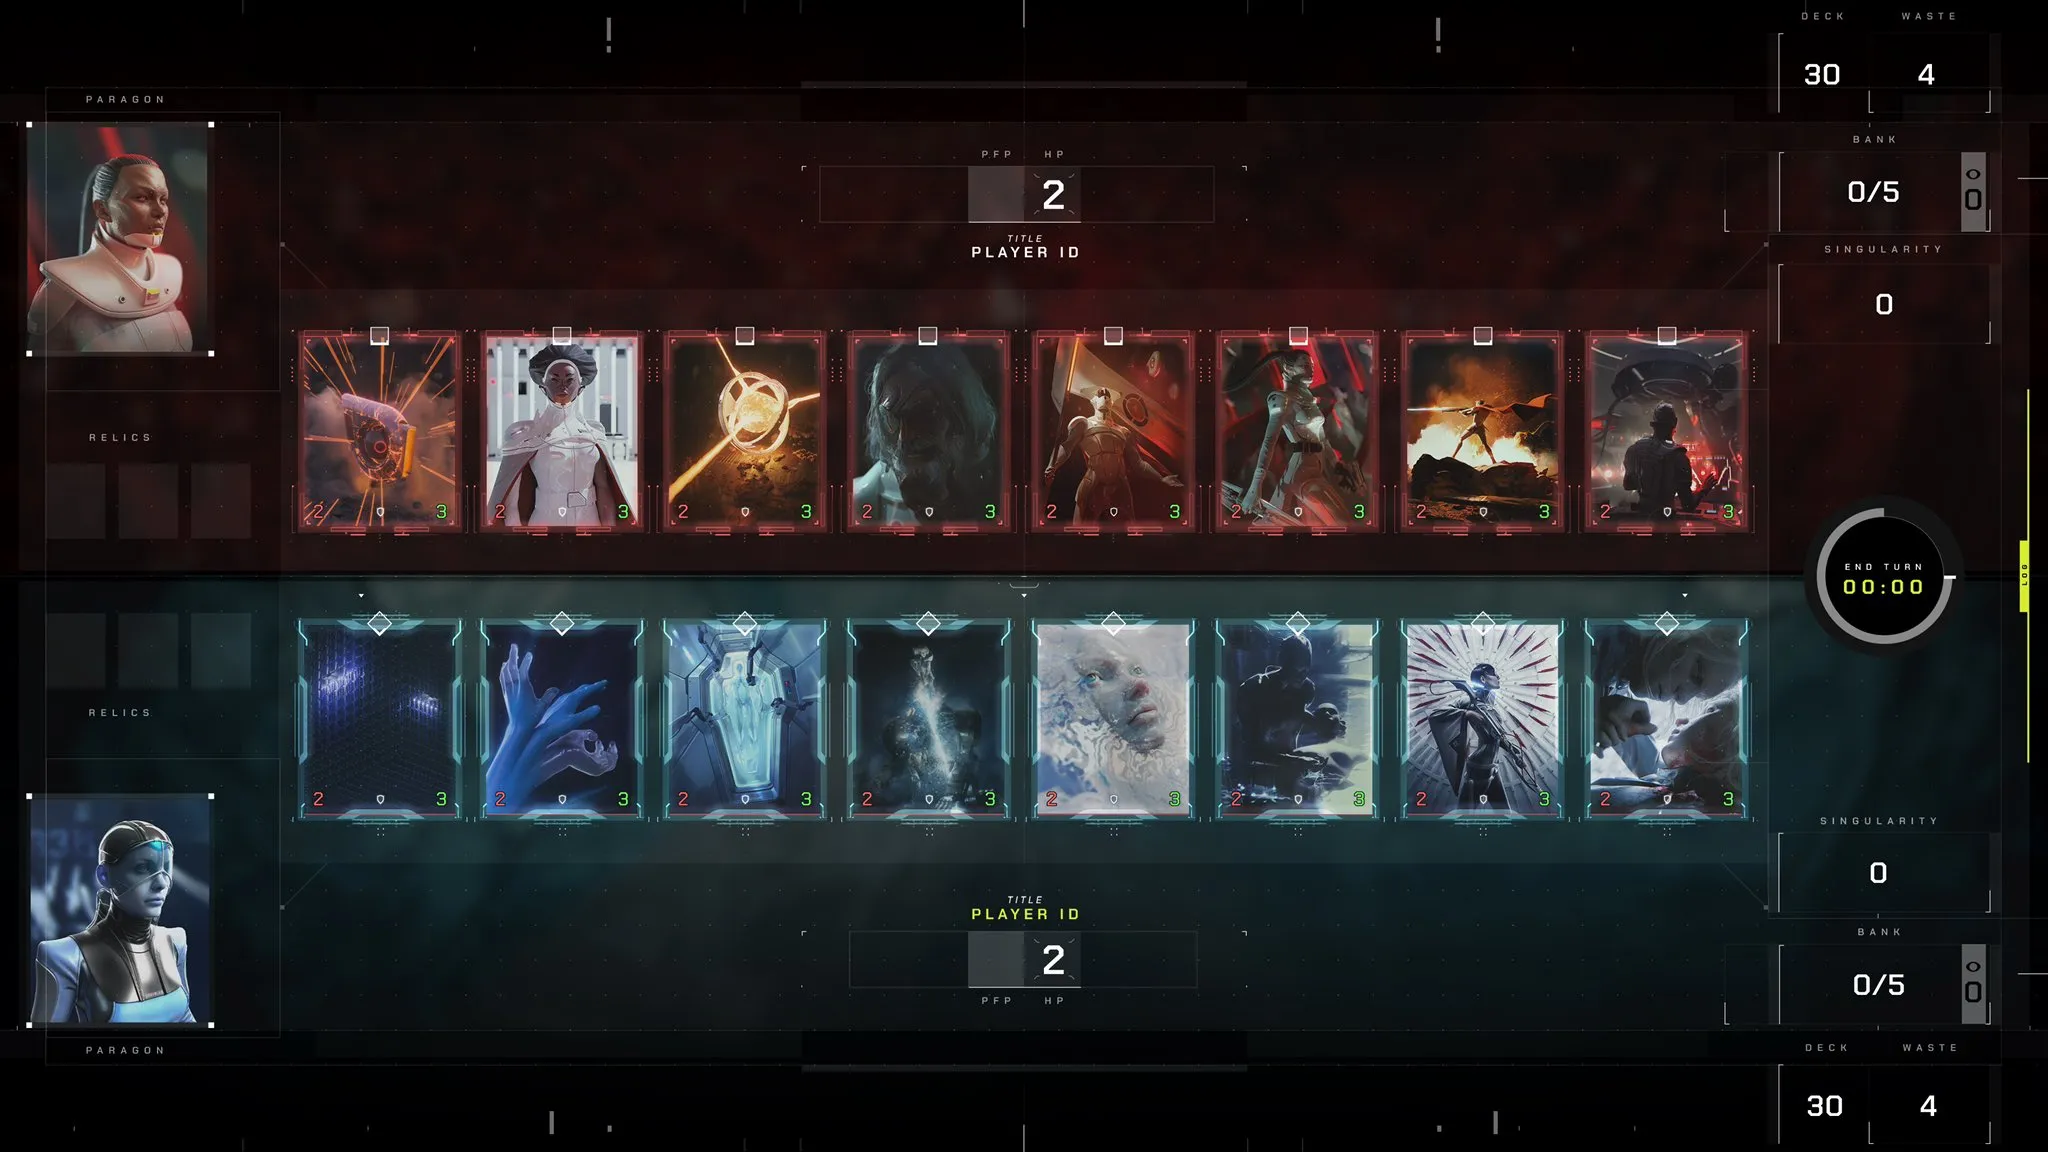 This is a screenshot of the Parallel game interface, displaying the card decks of competing players engaged in fierce battles to emerge victorious.